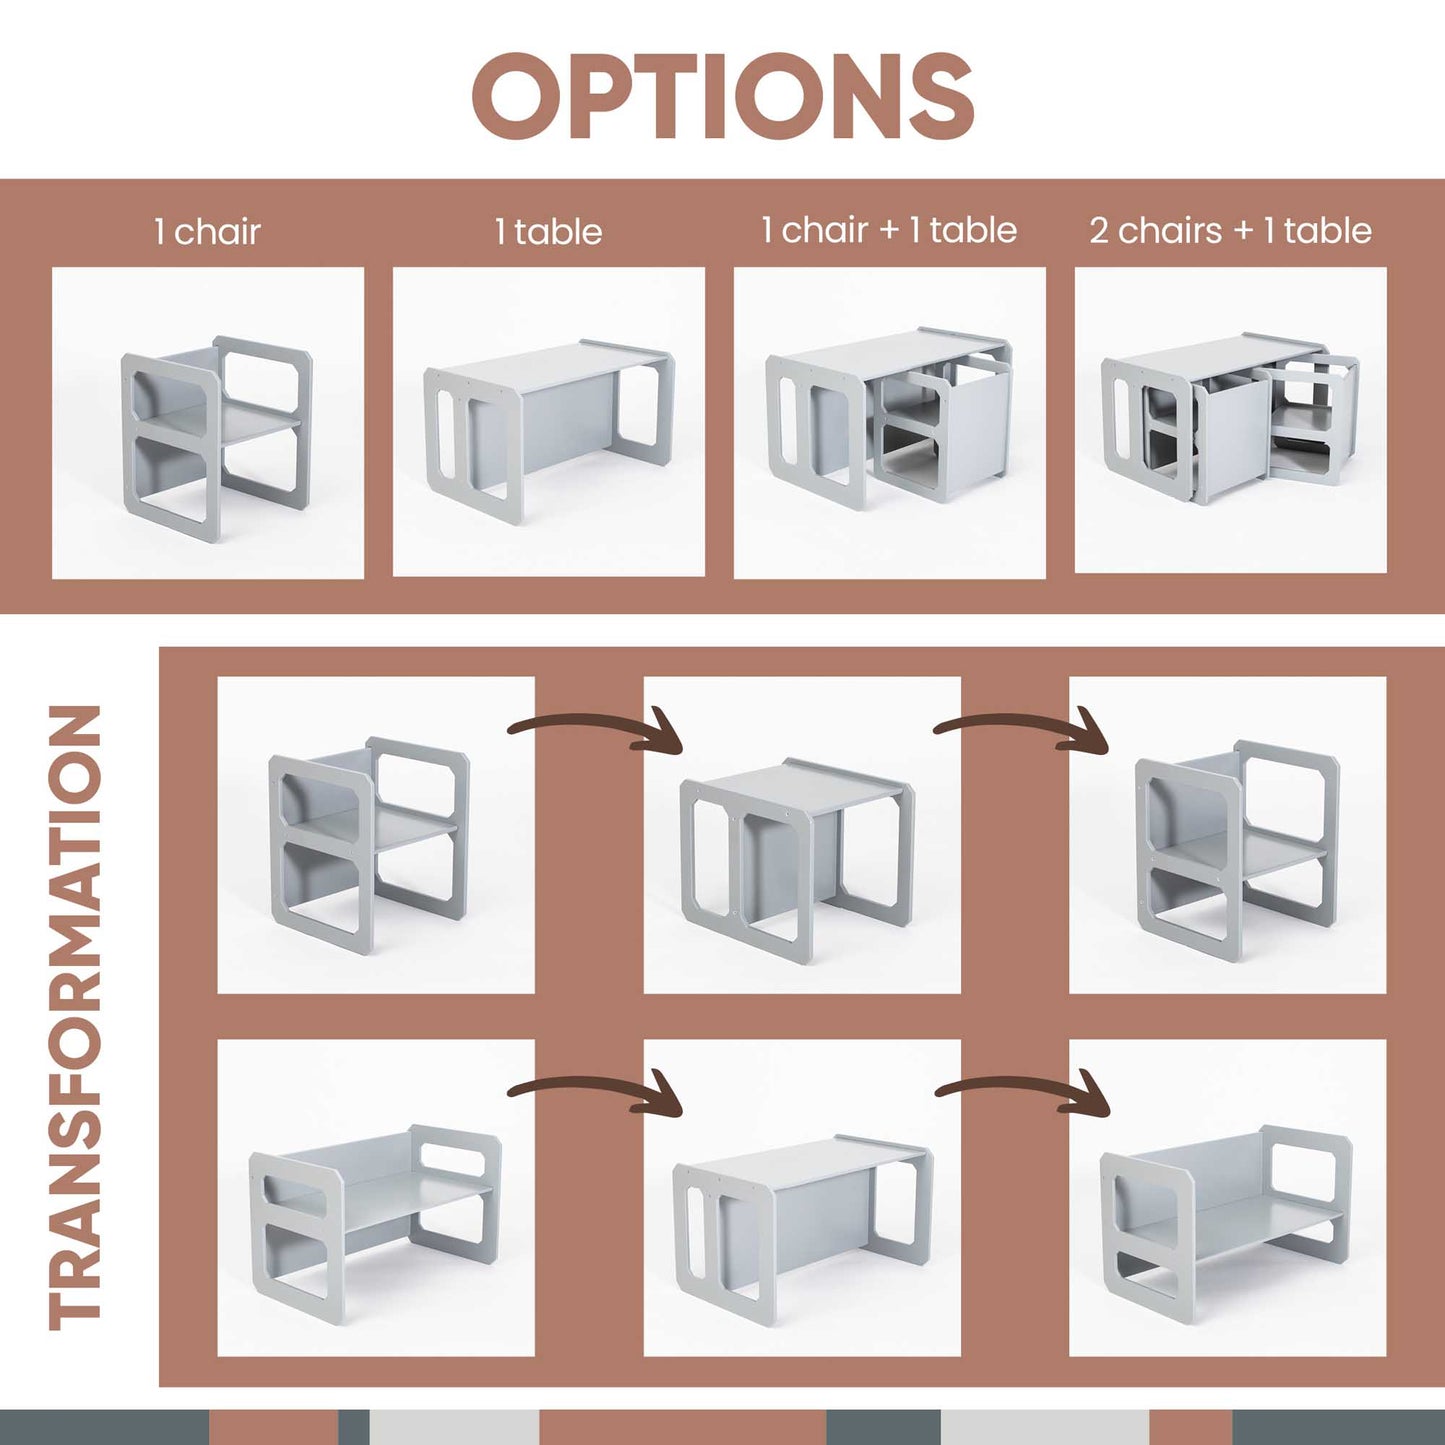 A poster displaying a variety of options for children's desks, including the Sweet Home From Wood Montessori weaning table and 2 chair set and toddler table.